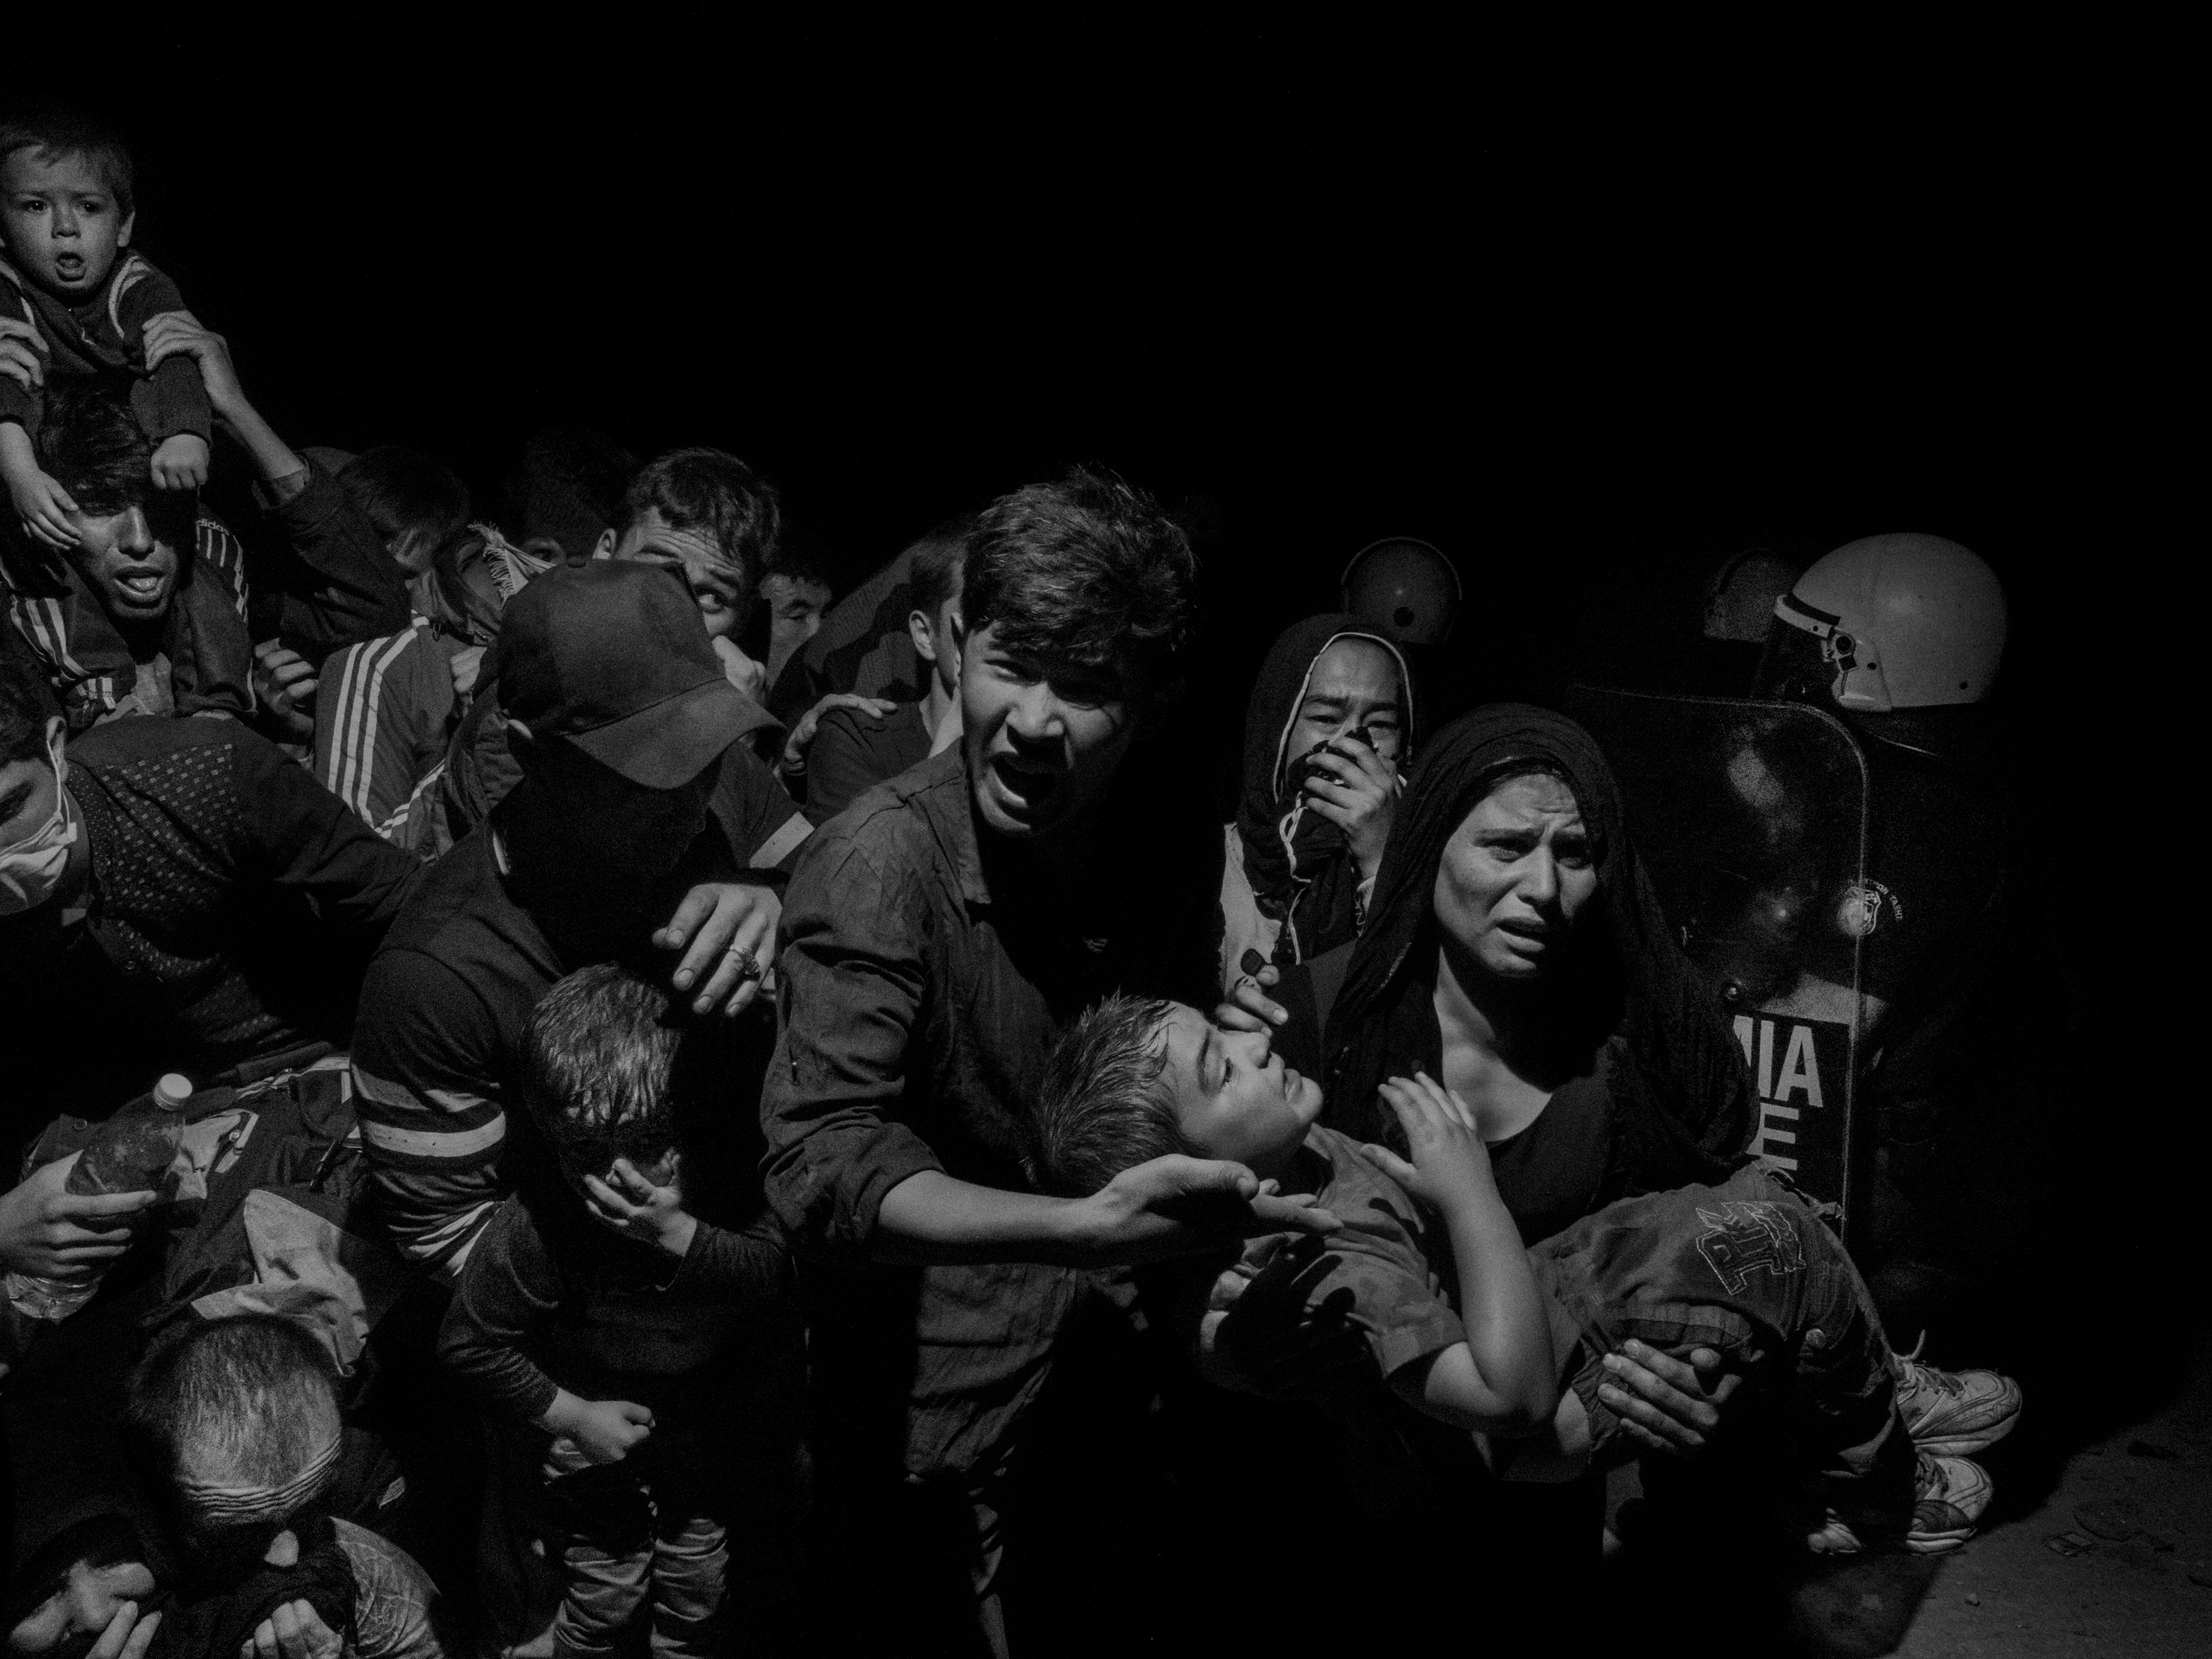 Alex Majoli is a recipient of the Smith Fund Fellowship. “Titanic,” explains how Europe can no longer isolate itself from the crisis unfolding across the Mediterranean. Copyright Alex Majoli